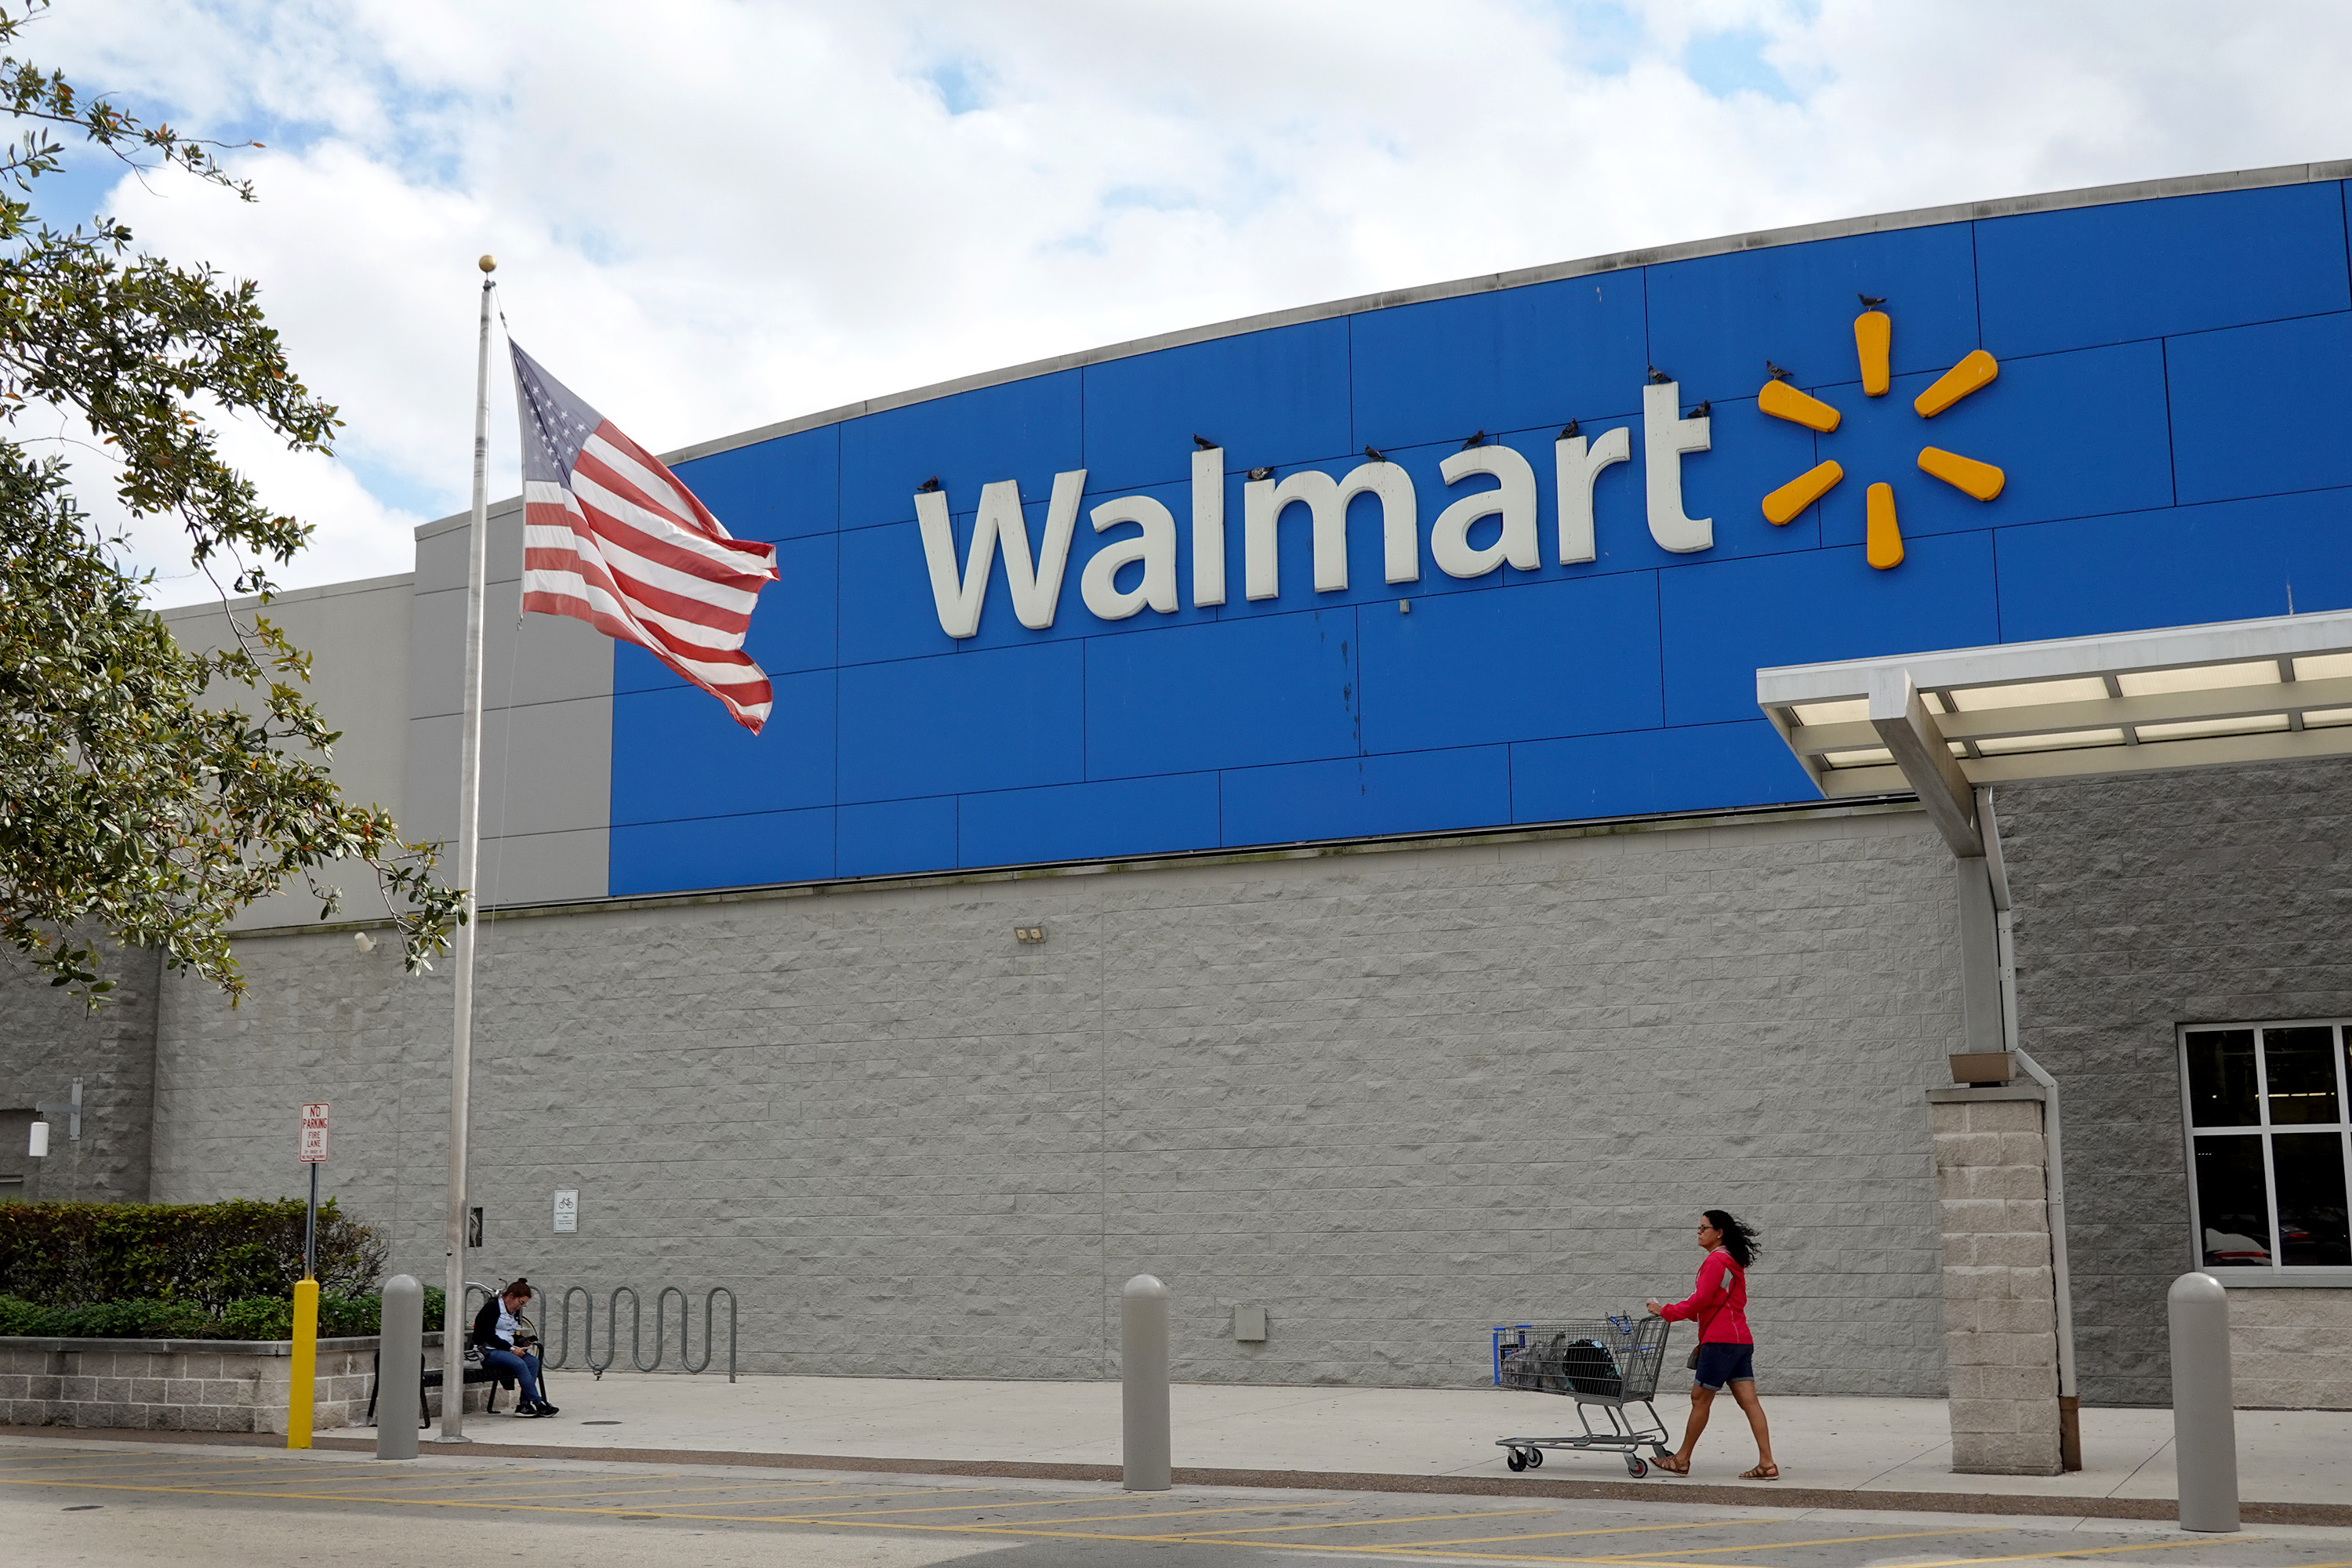 Walmart Plans to Close 3 Chicago Area Stores, Including Pickup